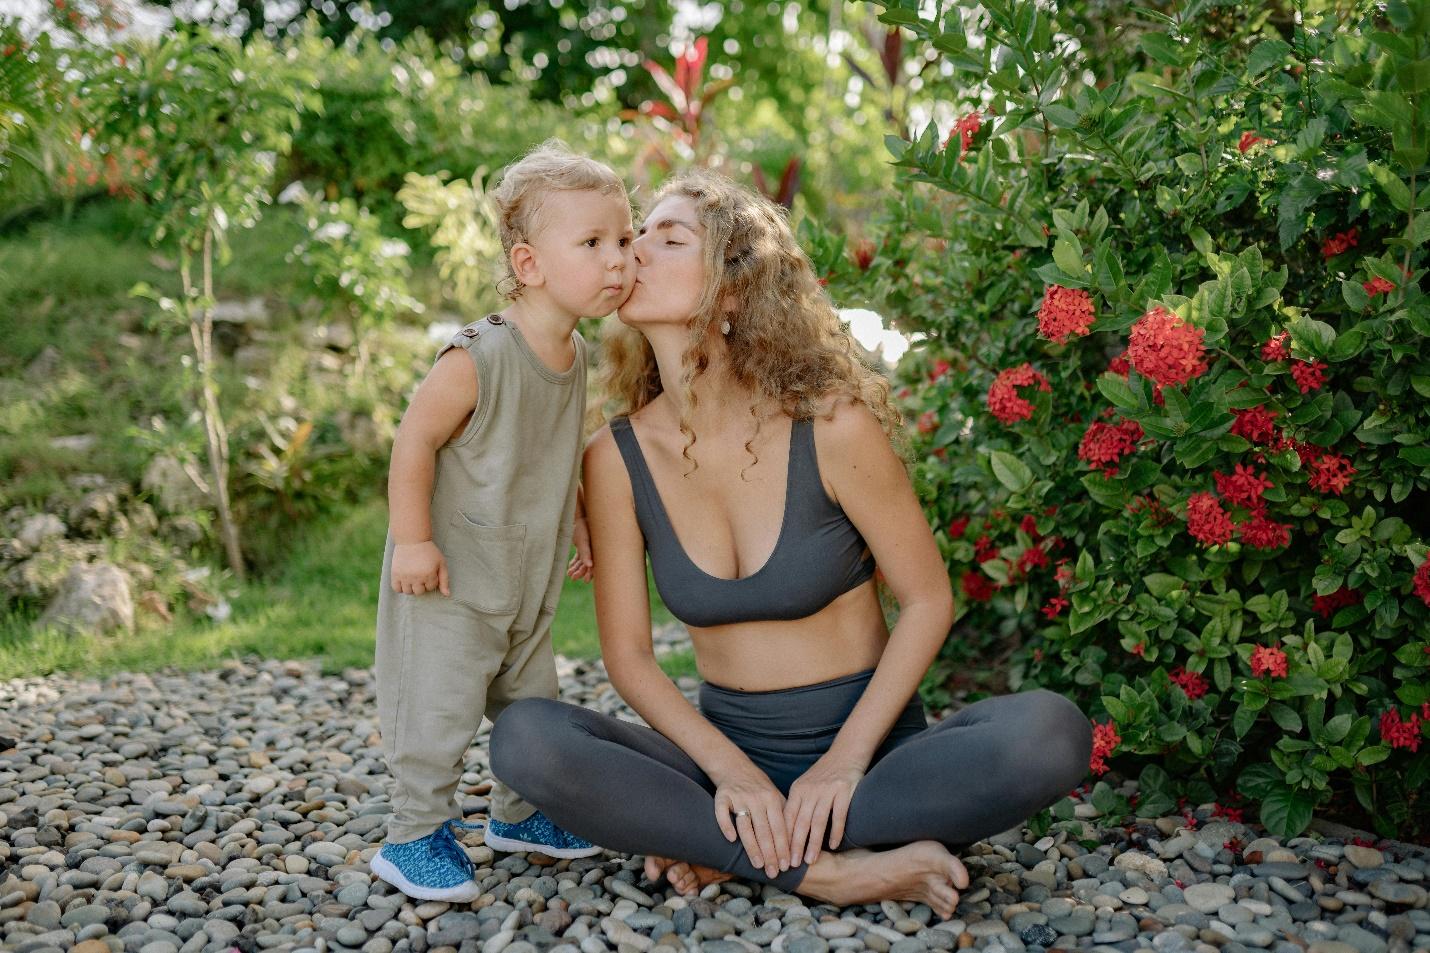 A person and child kissing Description automatically generated